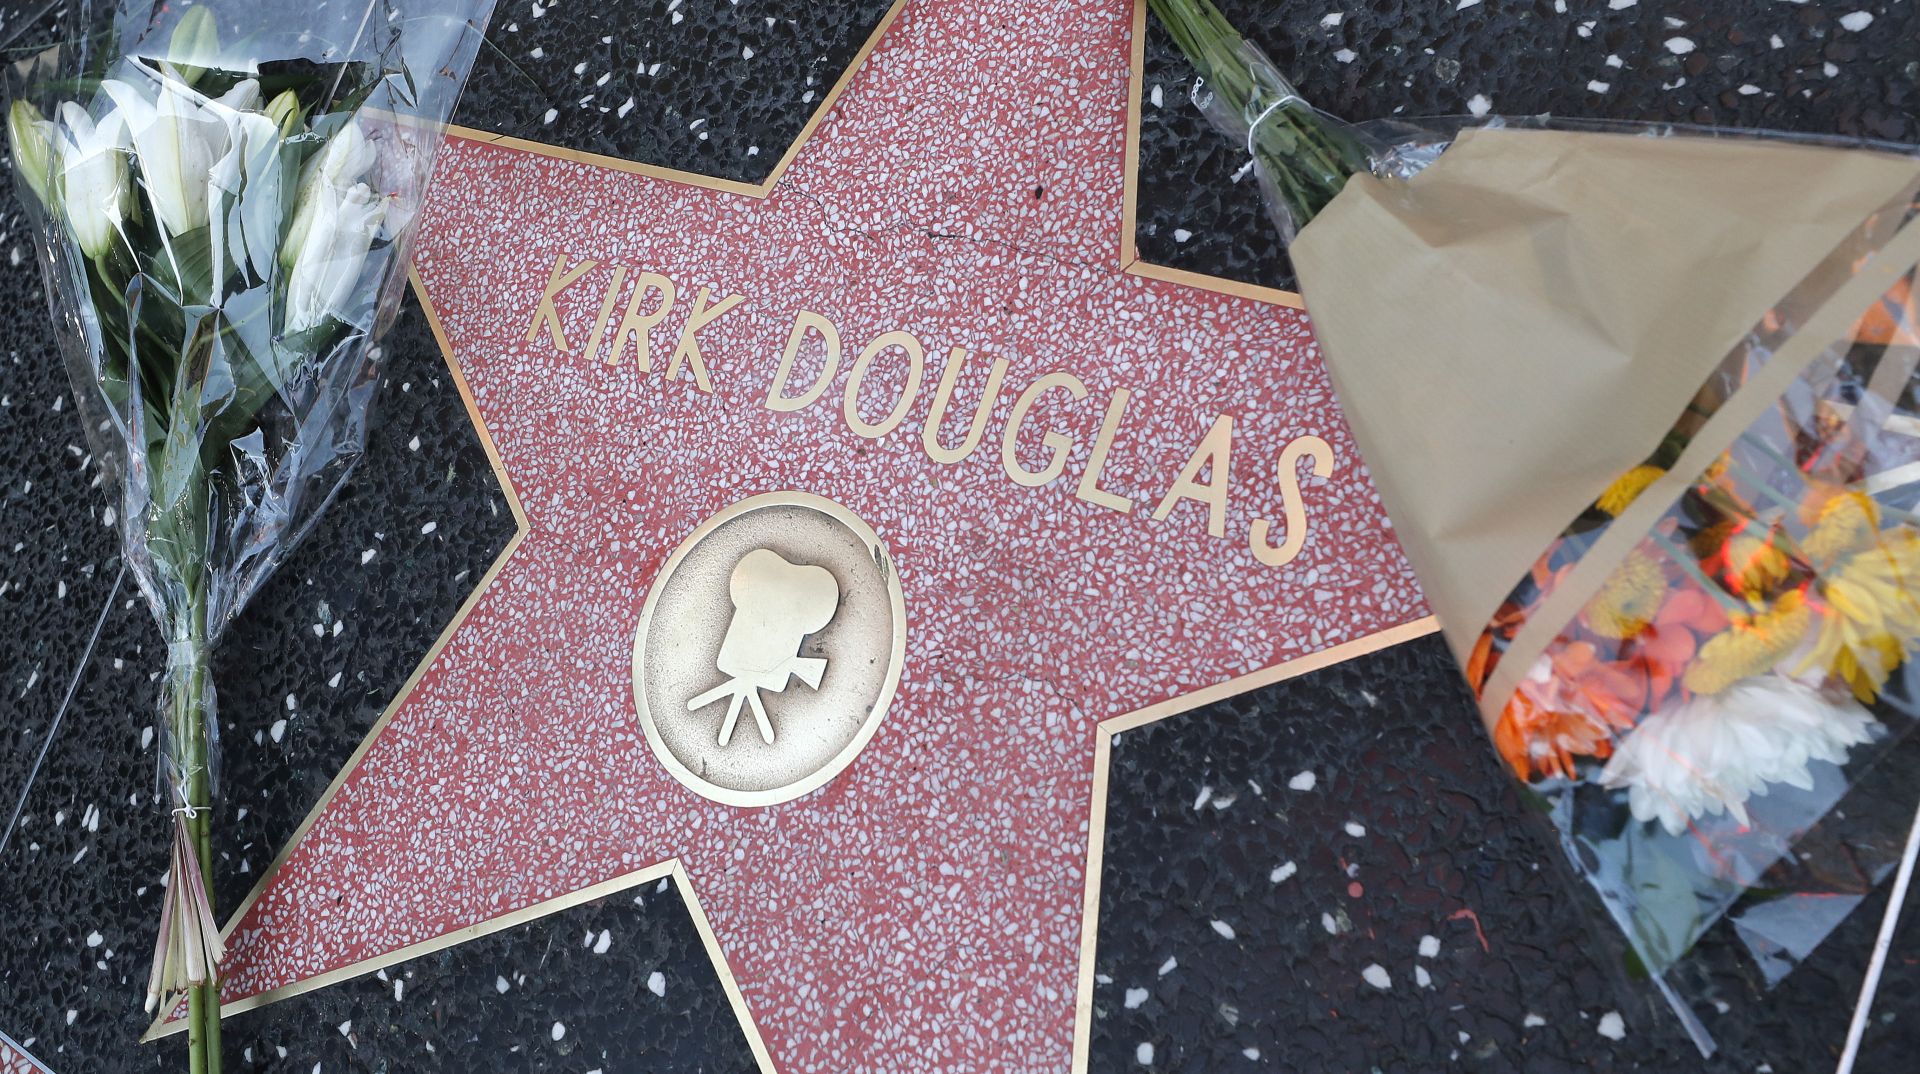 epa08196561 Flowers are placed on the Hollywood Star of US actor Kirk Douglas on the Hollywood Walk of Fame in Hollywood, California, USA, 05 February 2020. According to media reports, US actor Kirk Douglas died at the age of 103 on 05 February 2020.  EPA/JOHN G. MABANGLO